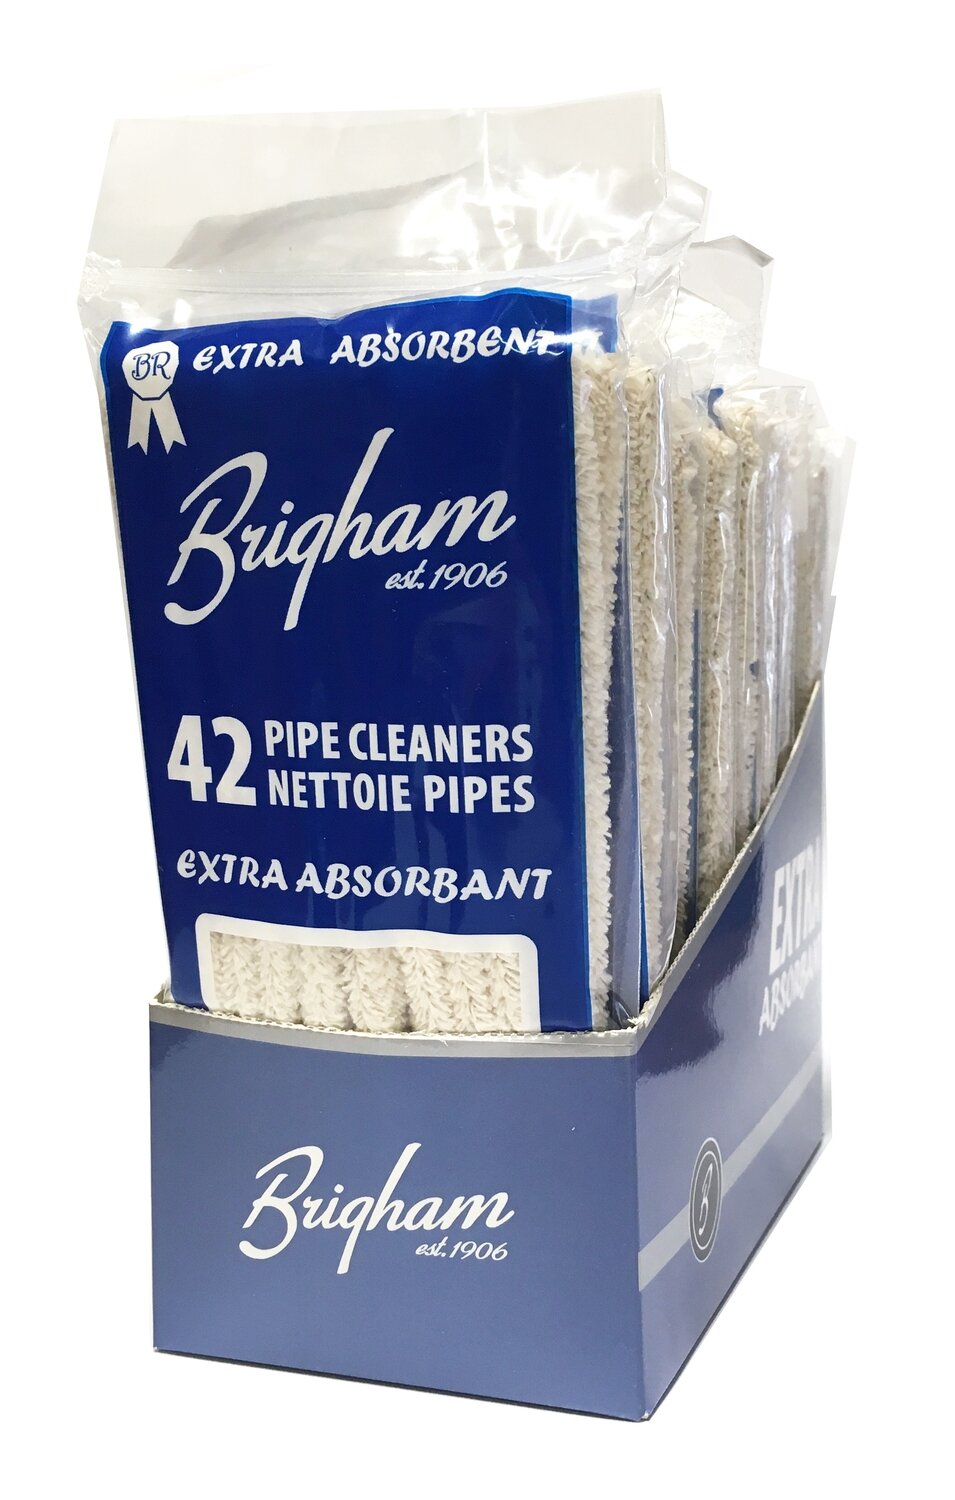 Brigham Extra Absorbent Pipe Cleaners 42 per pack